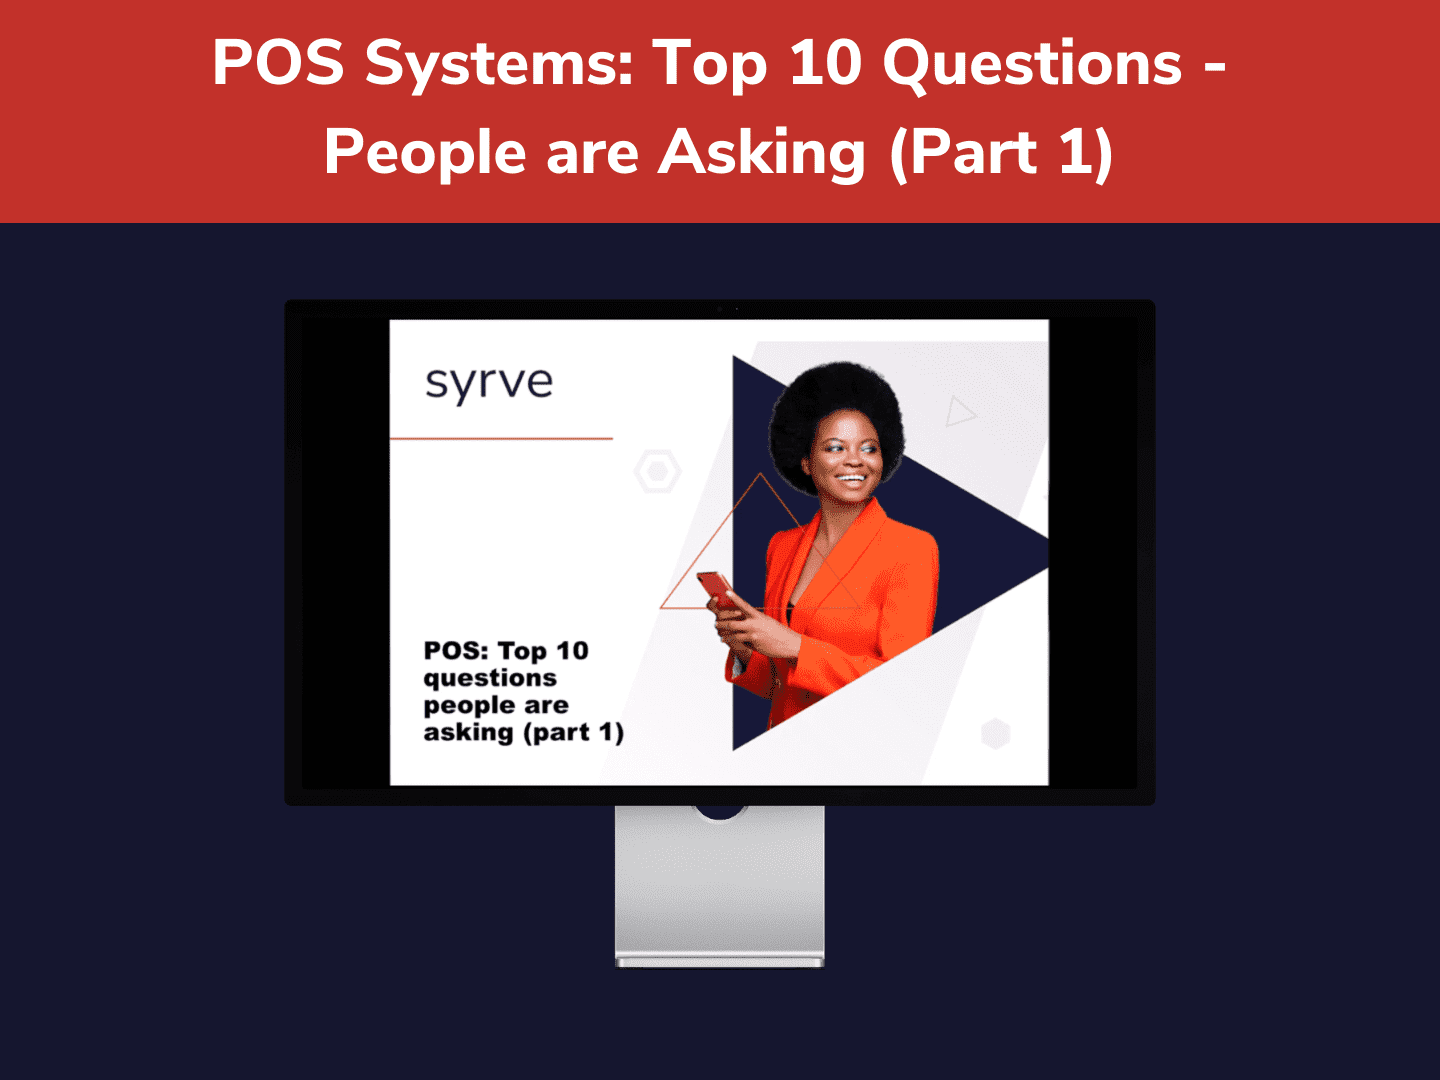 POS Systems: Top 10 Questions - People are Asking (Part 1)